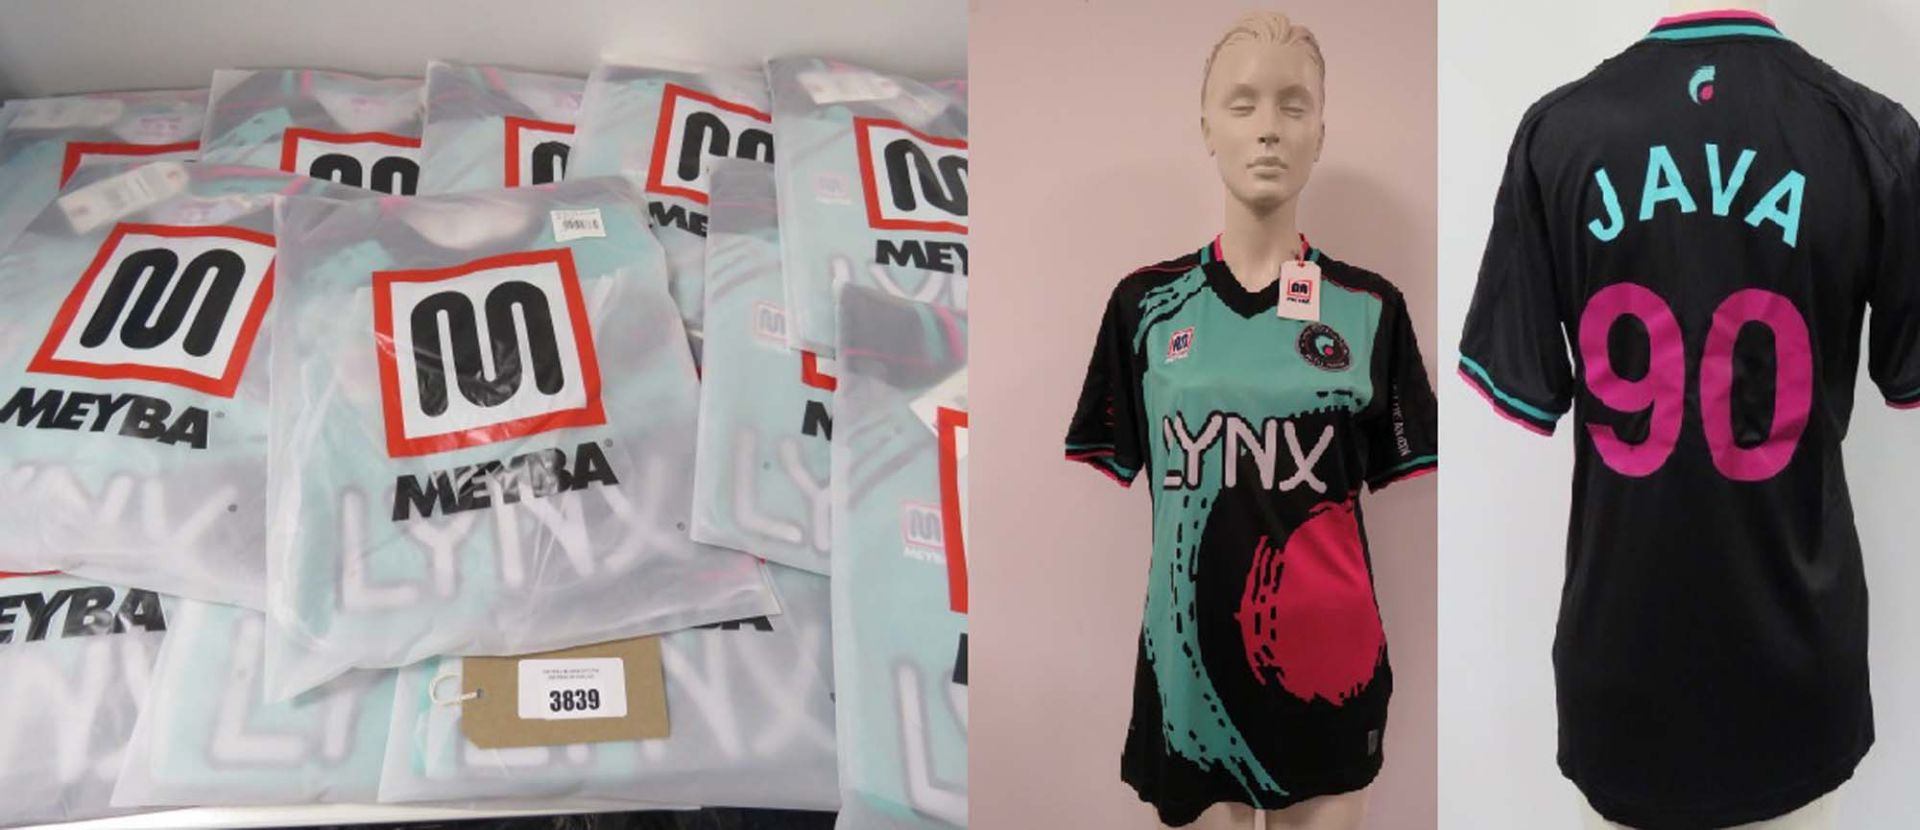 13 Meyba Lynx Java replica shirts in various sizes